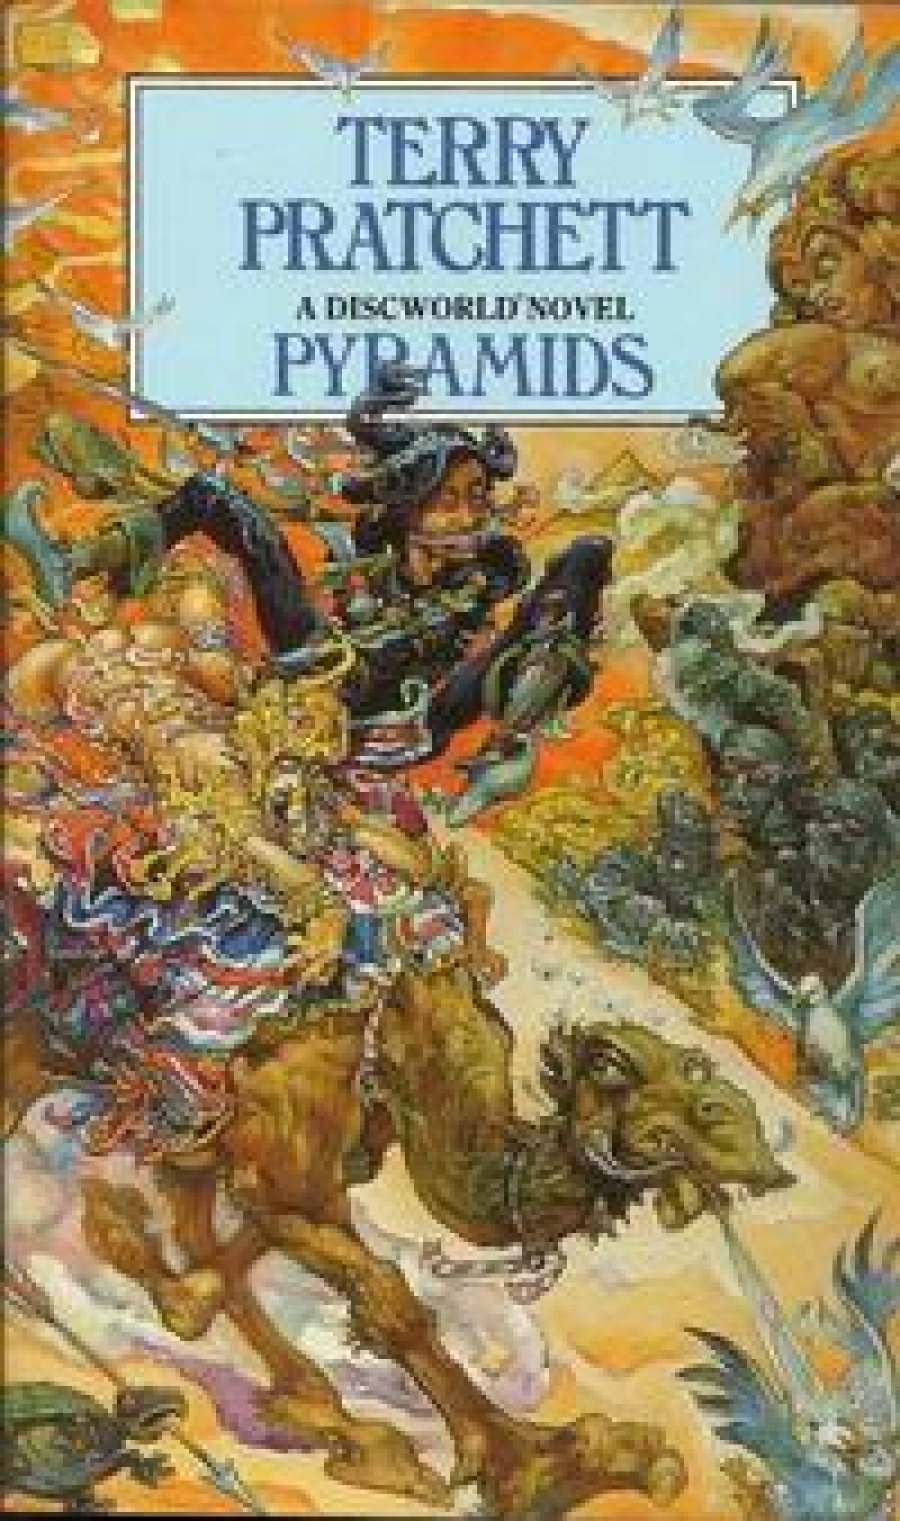 Pratchett T. Pyramids (The Book of Going Forth) 